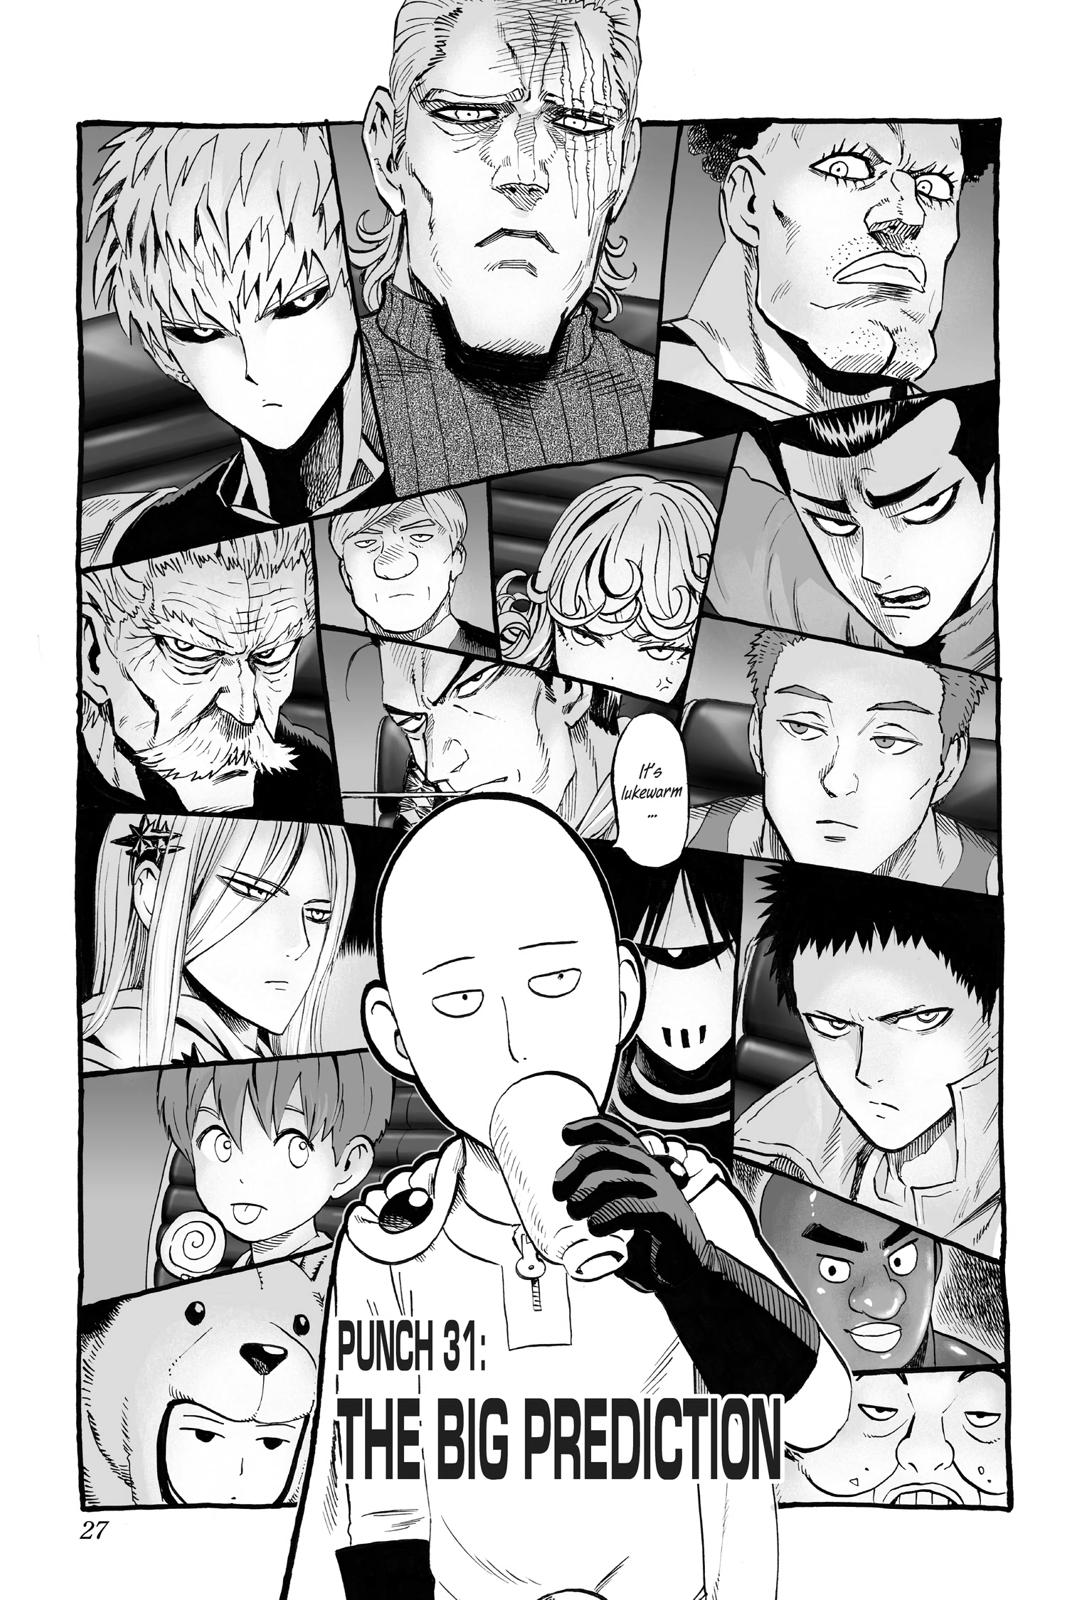 One-Punch Man, Punch 31 image 01